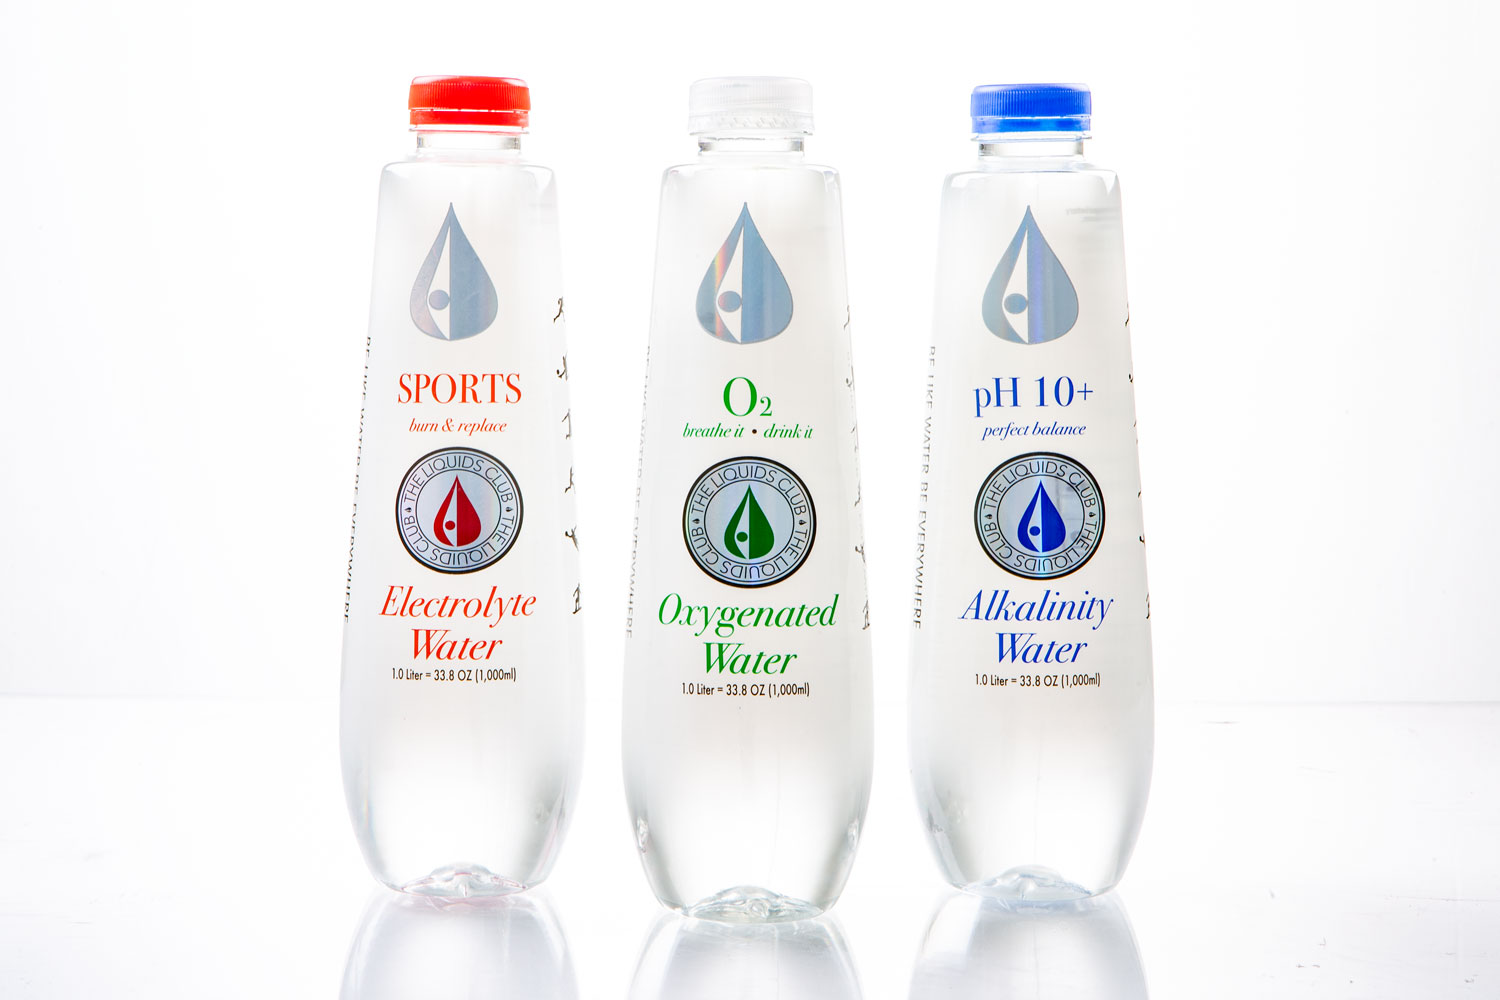 Check out: The Liquids Club™, the premier bottled water! | @TheLiquidsClub